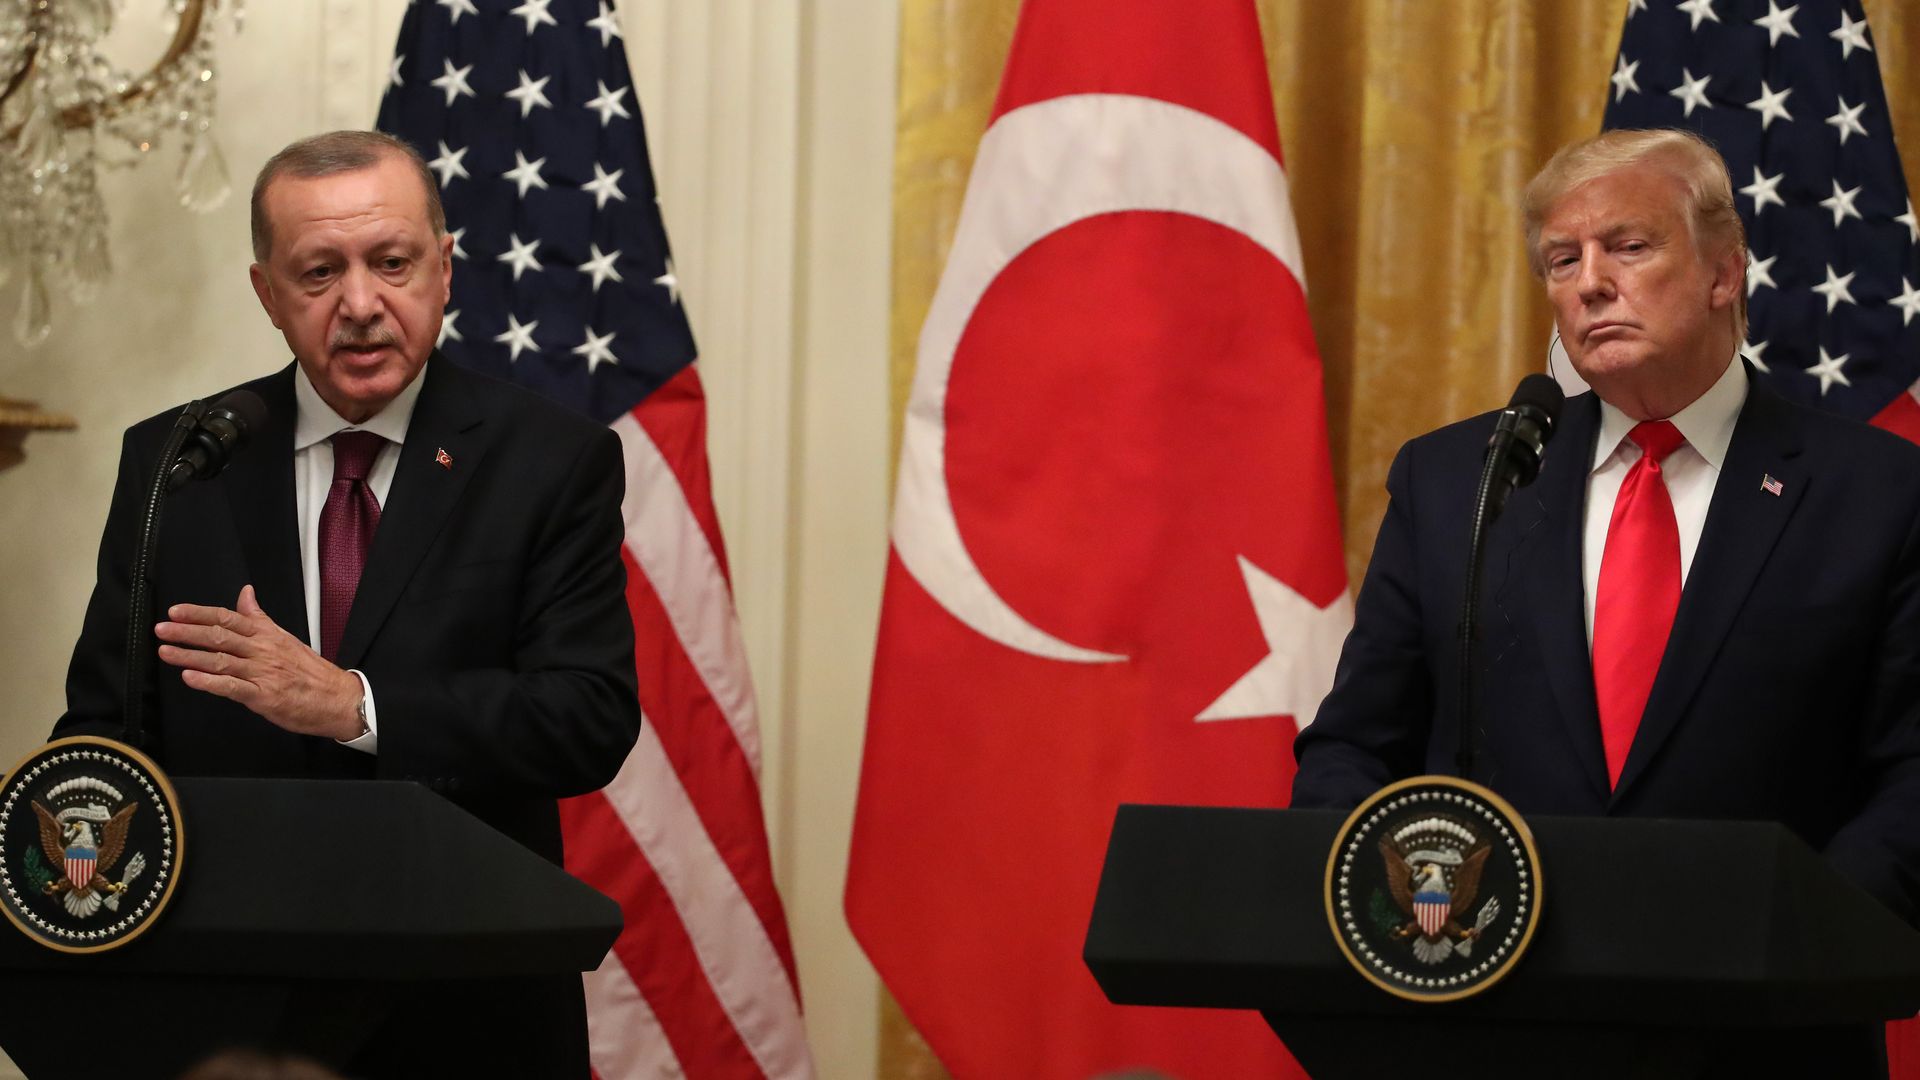 Turkish President Recep Tayyip Erdogan speaks during a press conference with President Trump 